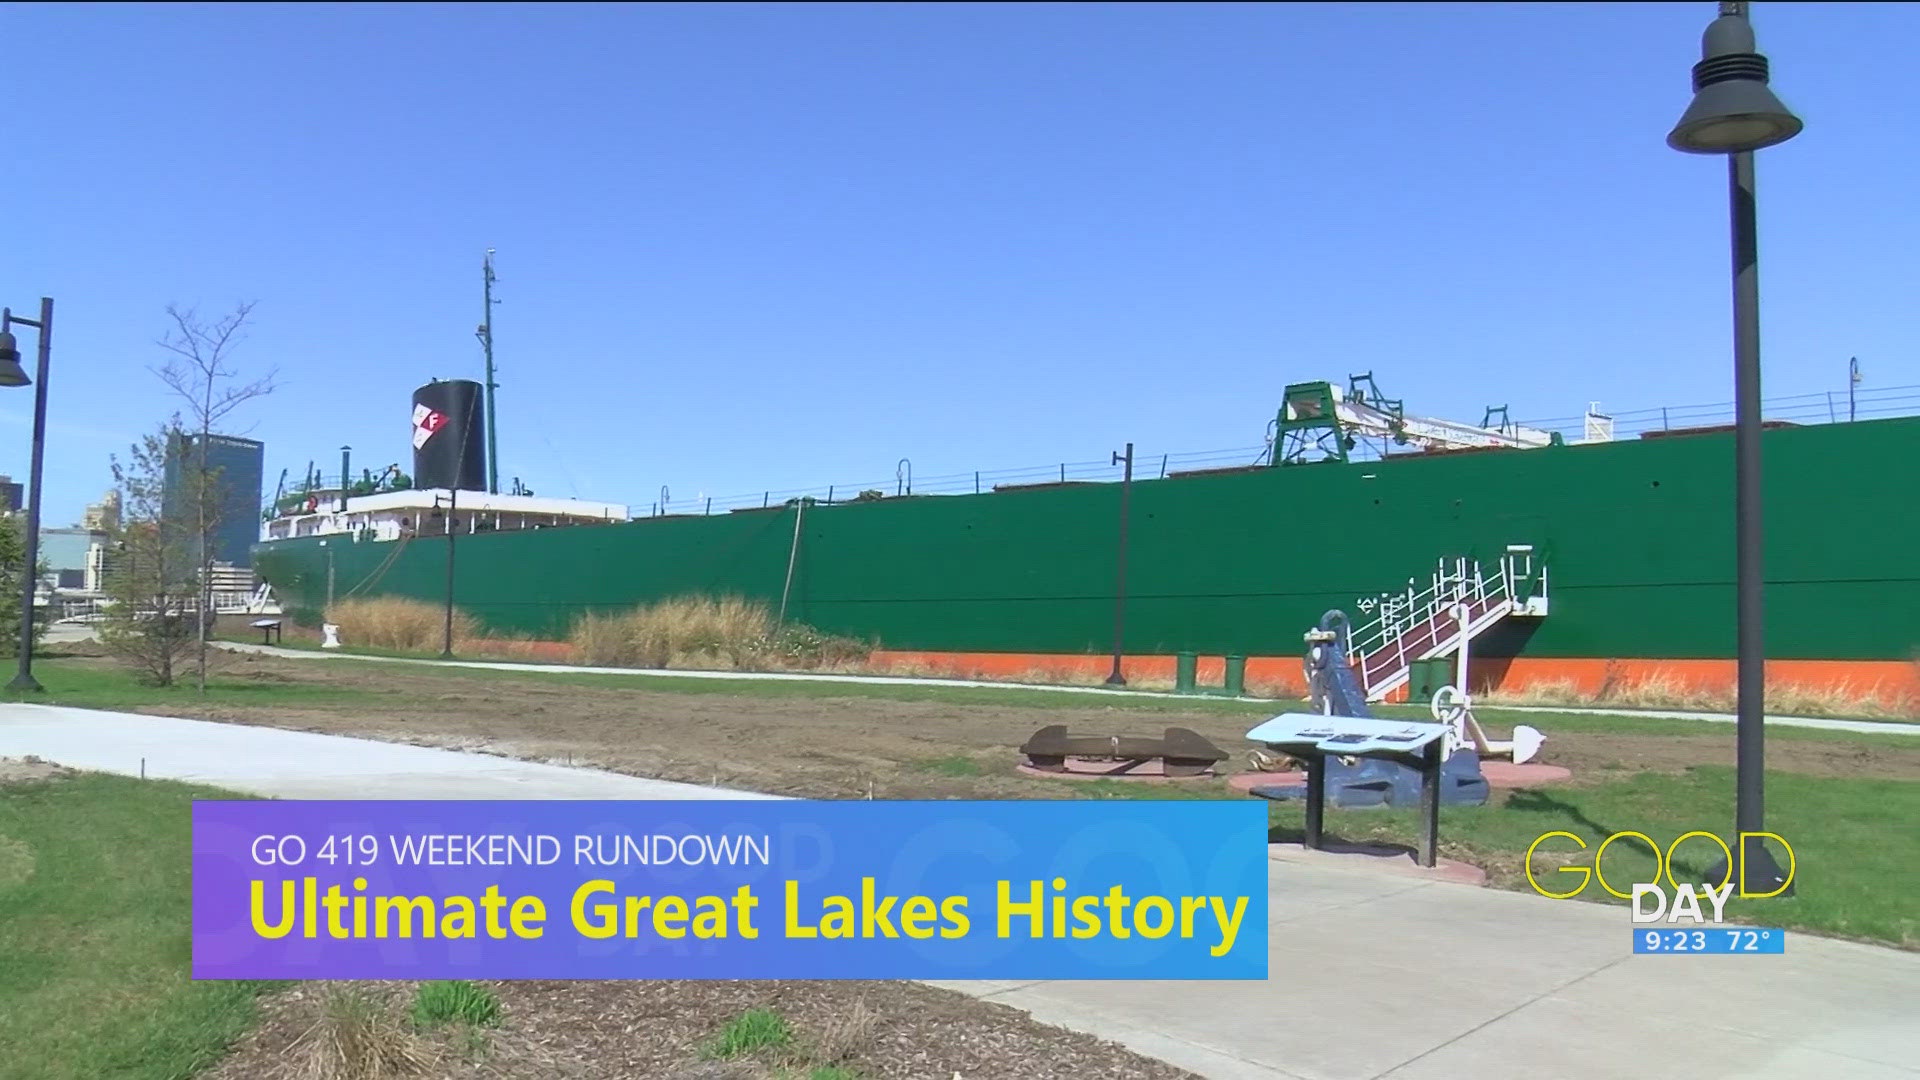 Enjoy events in the 419 like the Ultimate Great Lakes History day, the Disabled and Proud fest at Swan Creek, a Queen tribute band and more.